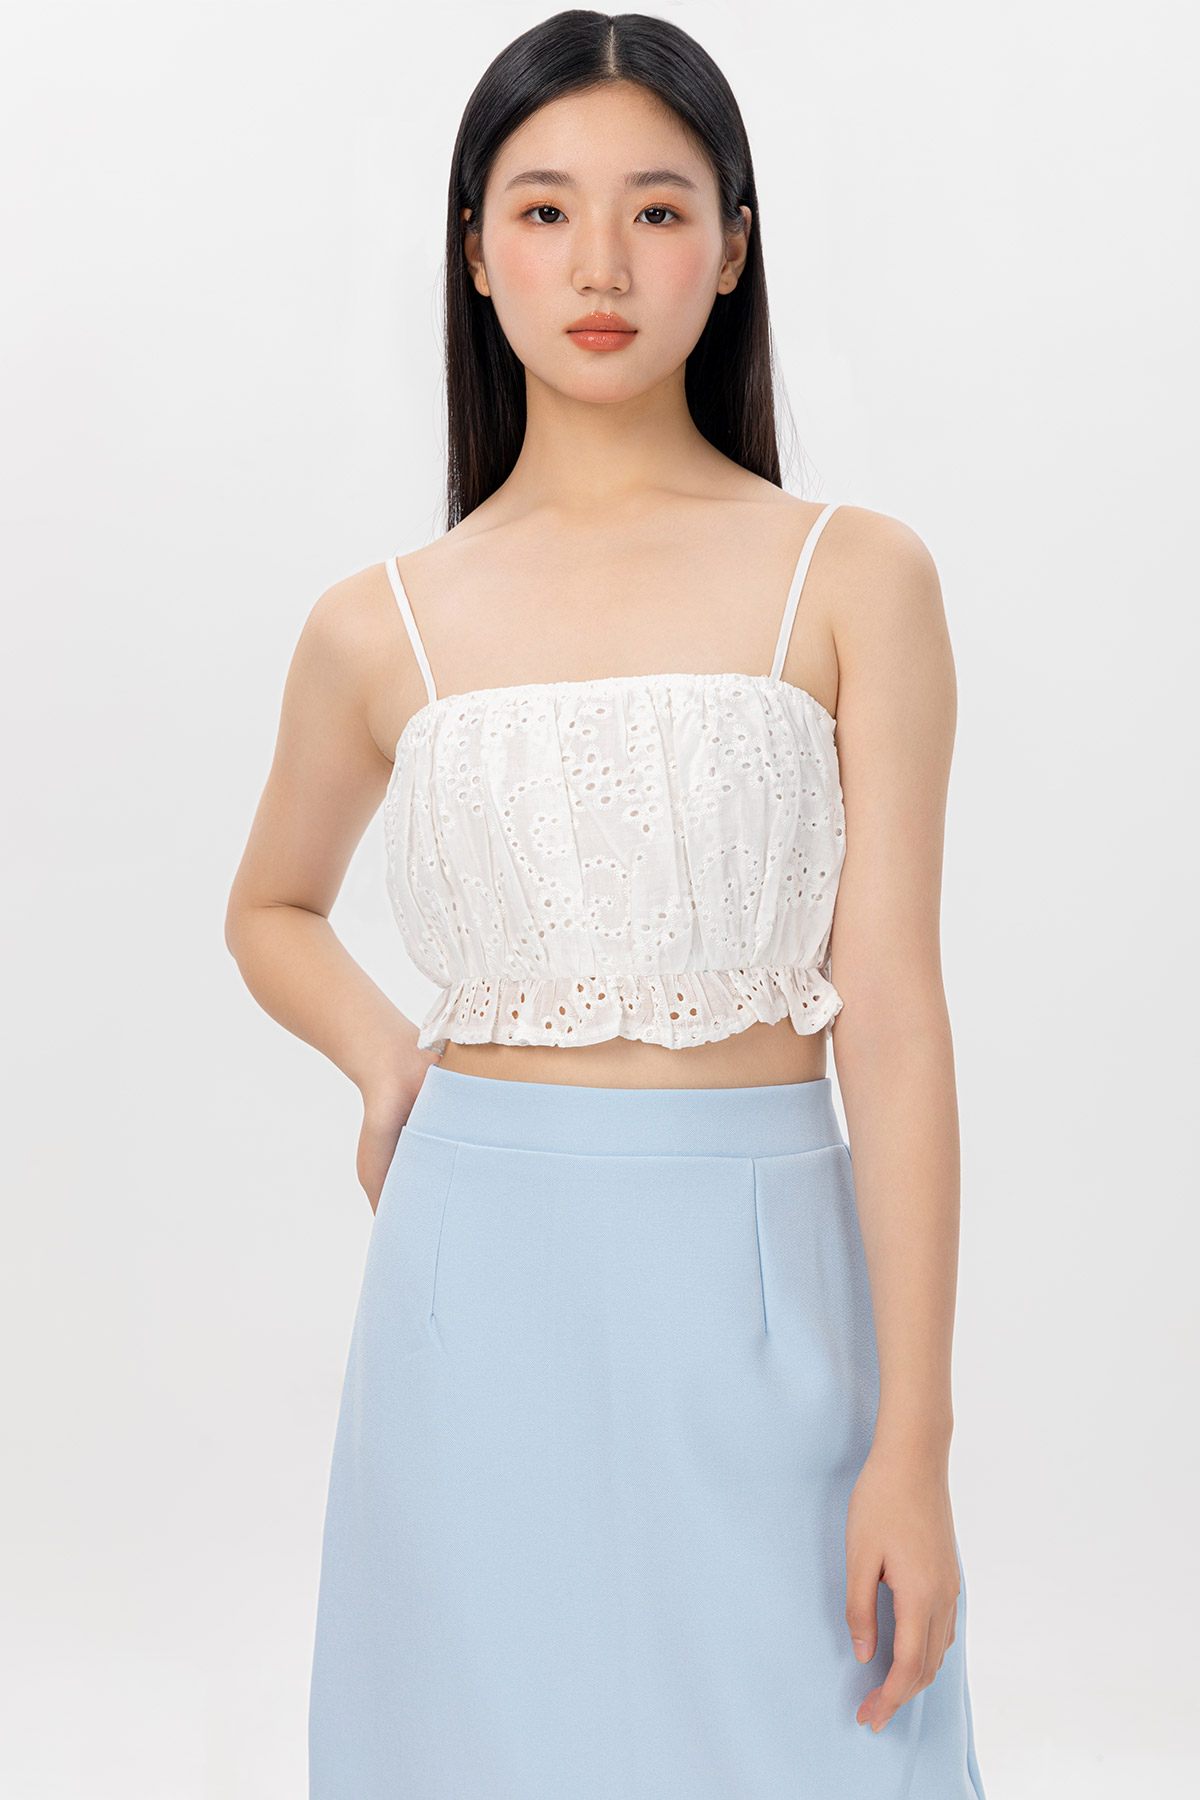 ROCHETTE TOP - DAINTY [BY MODPARADE]